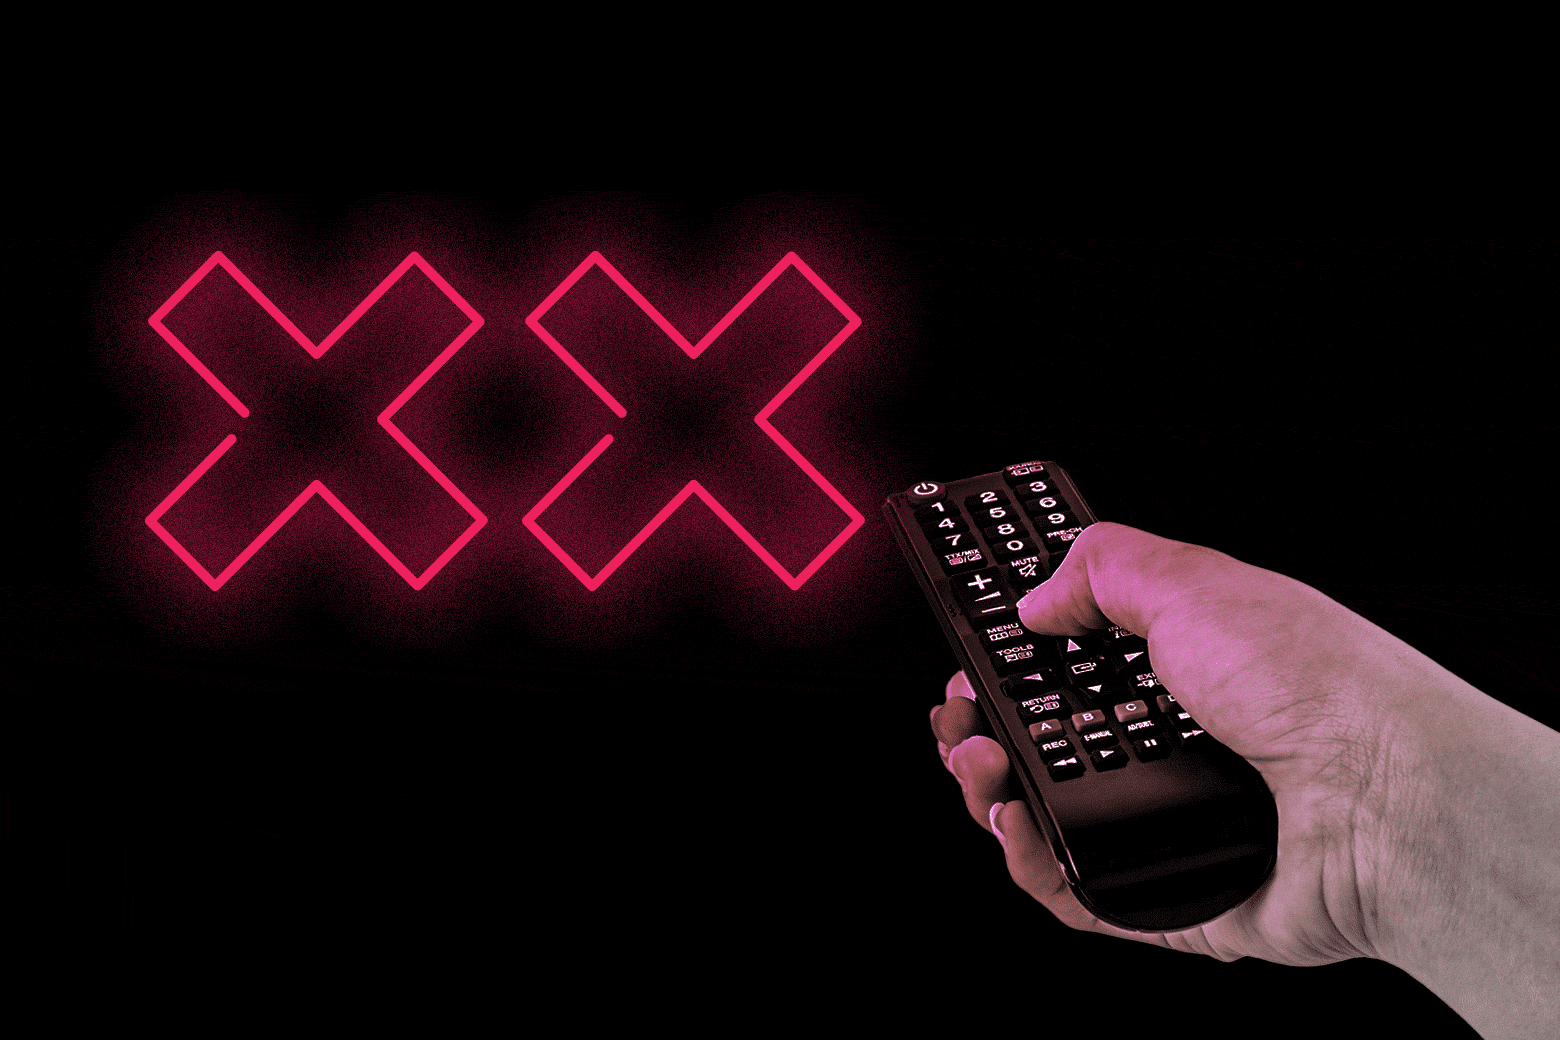 A hand points a remote control at two neon x's.